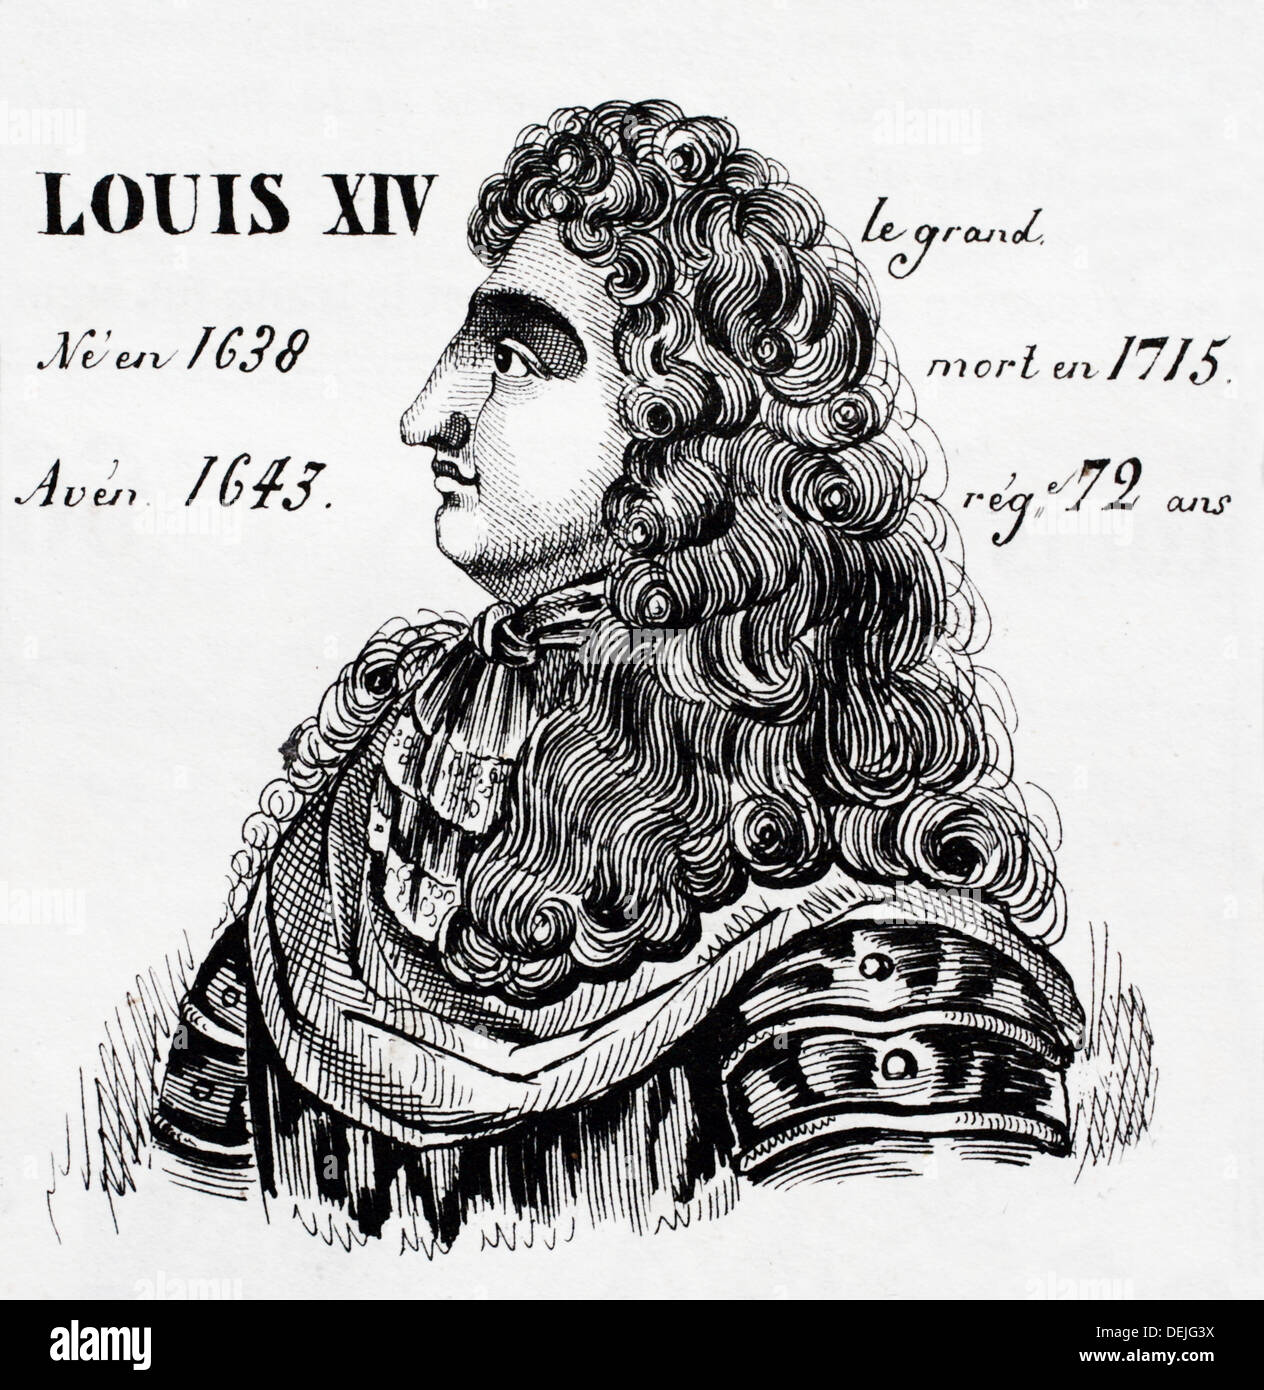 Louis XIV, le grand, king of France from 1647 to 1715. History of Stock Photo: 60644078 - Alamy